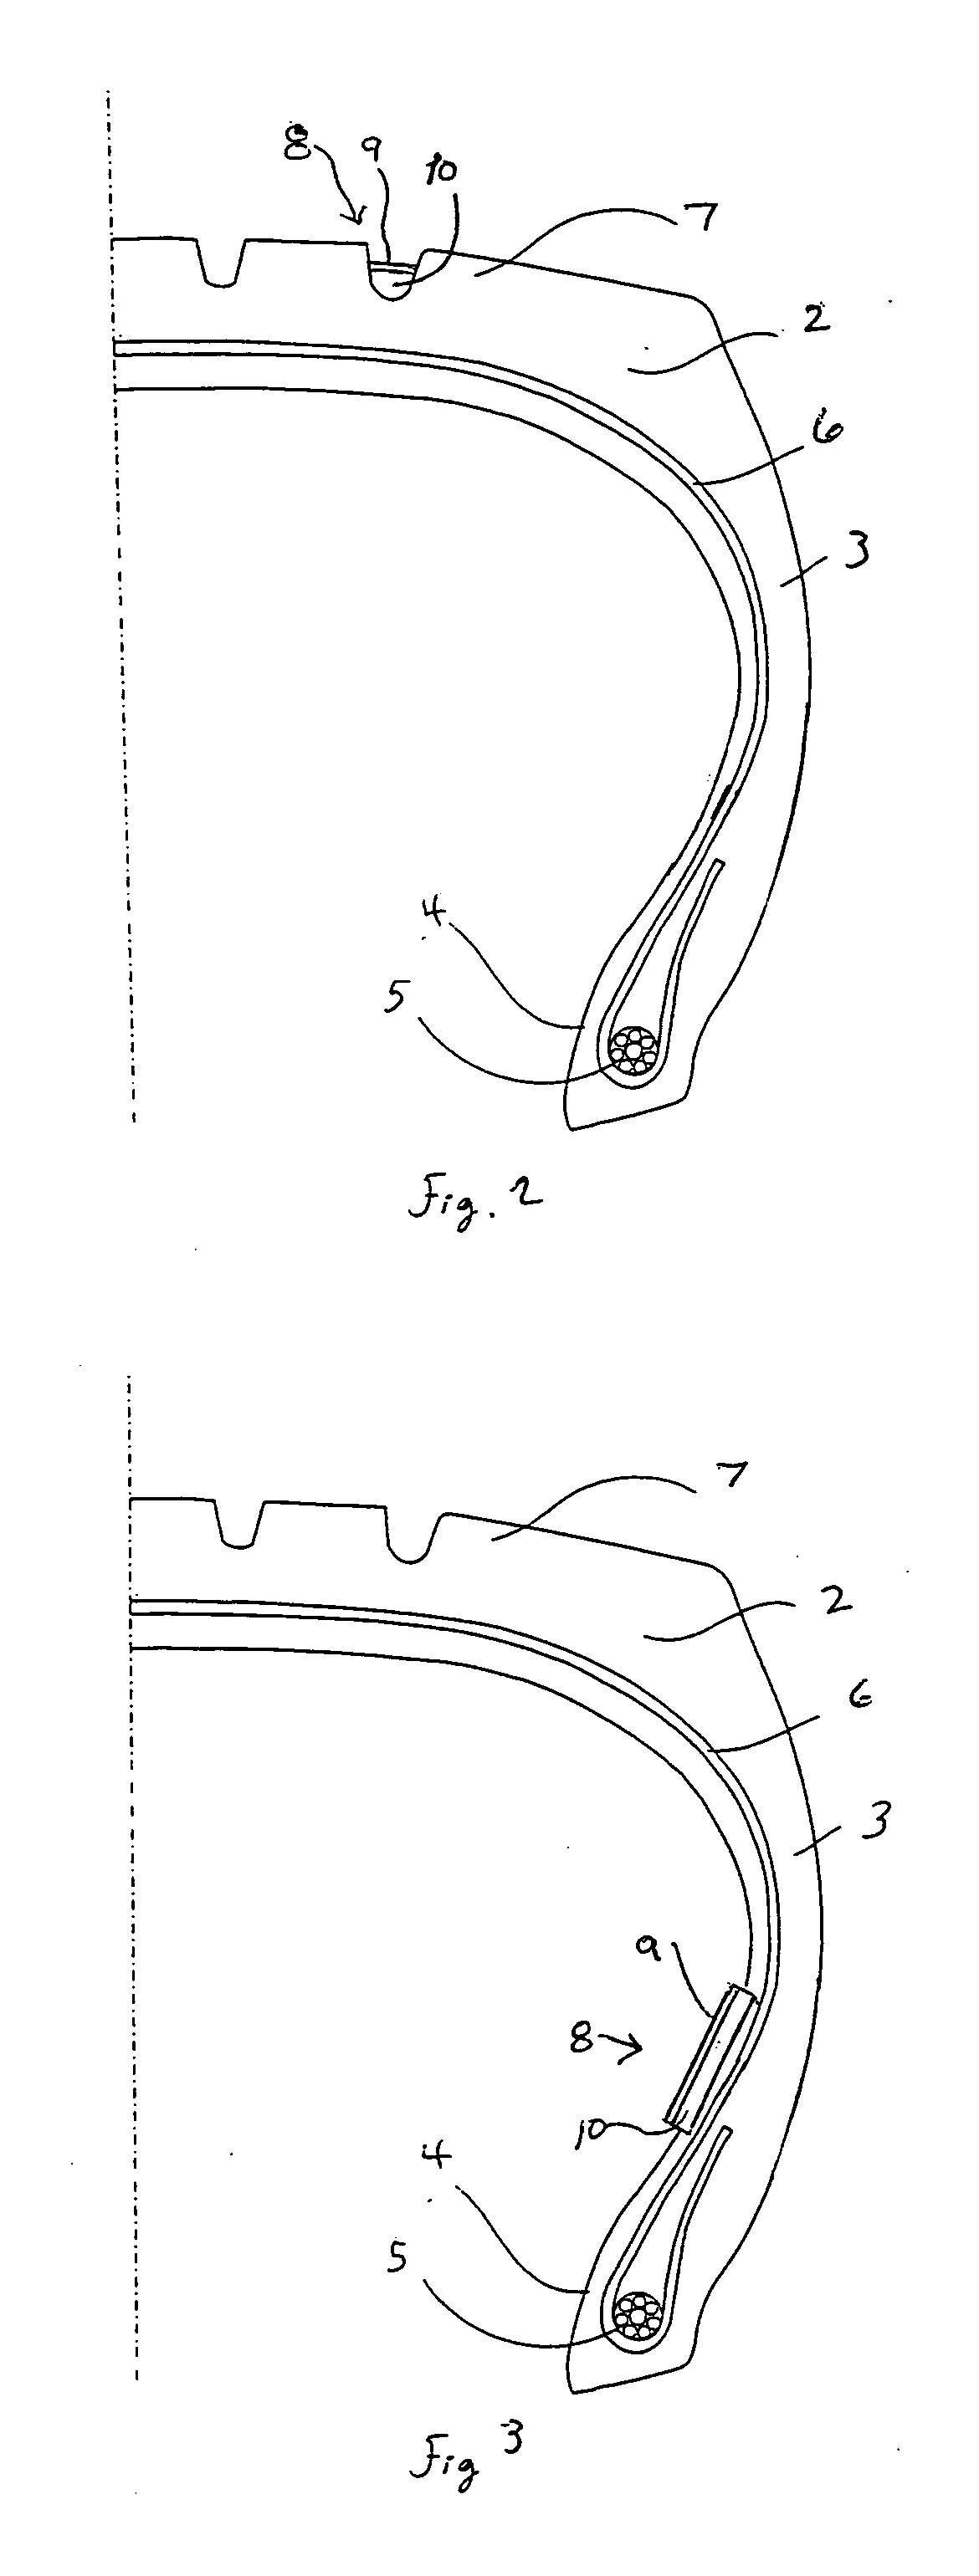 Tire having an element or covering attached to a surface thereof